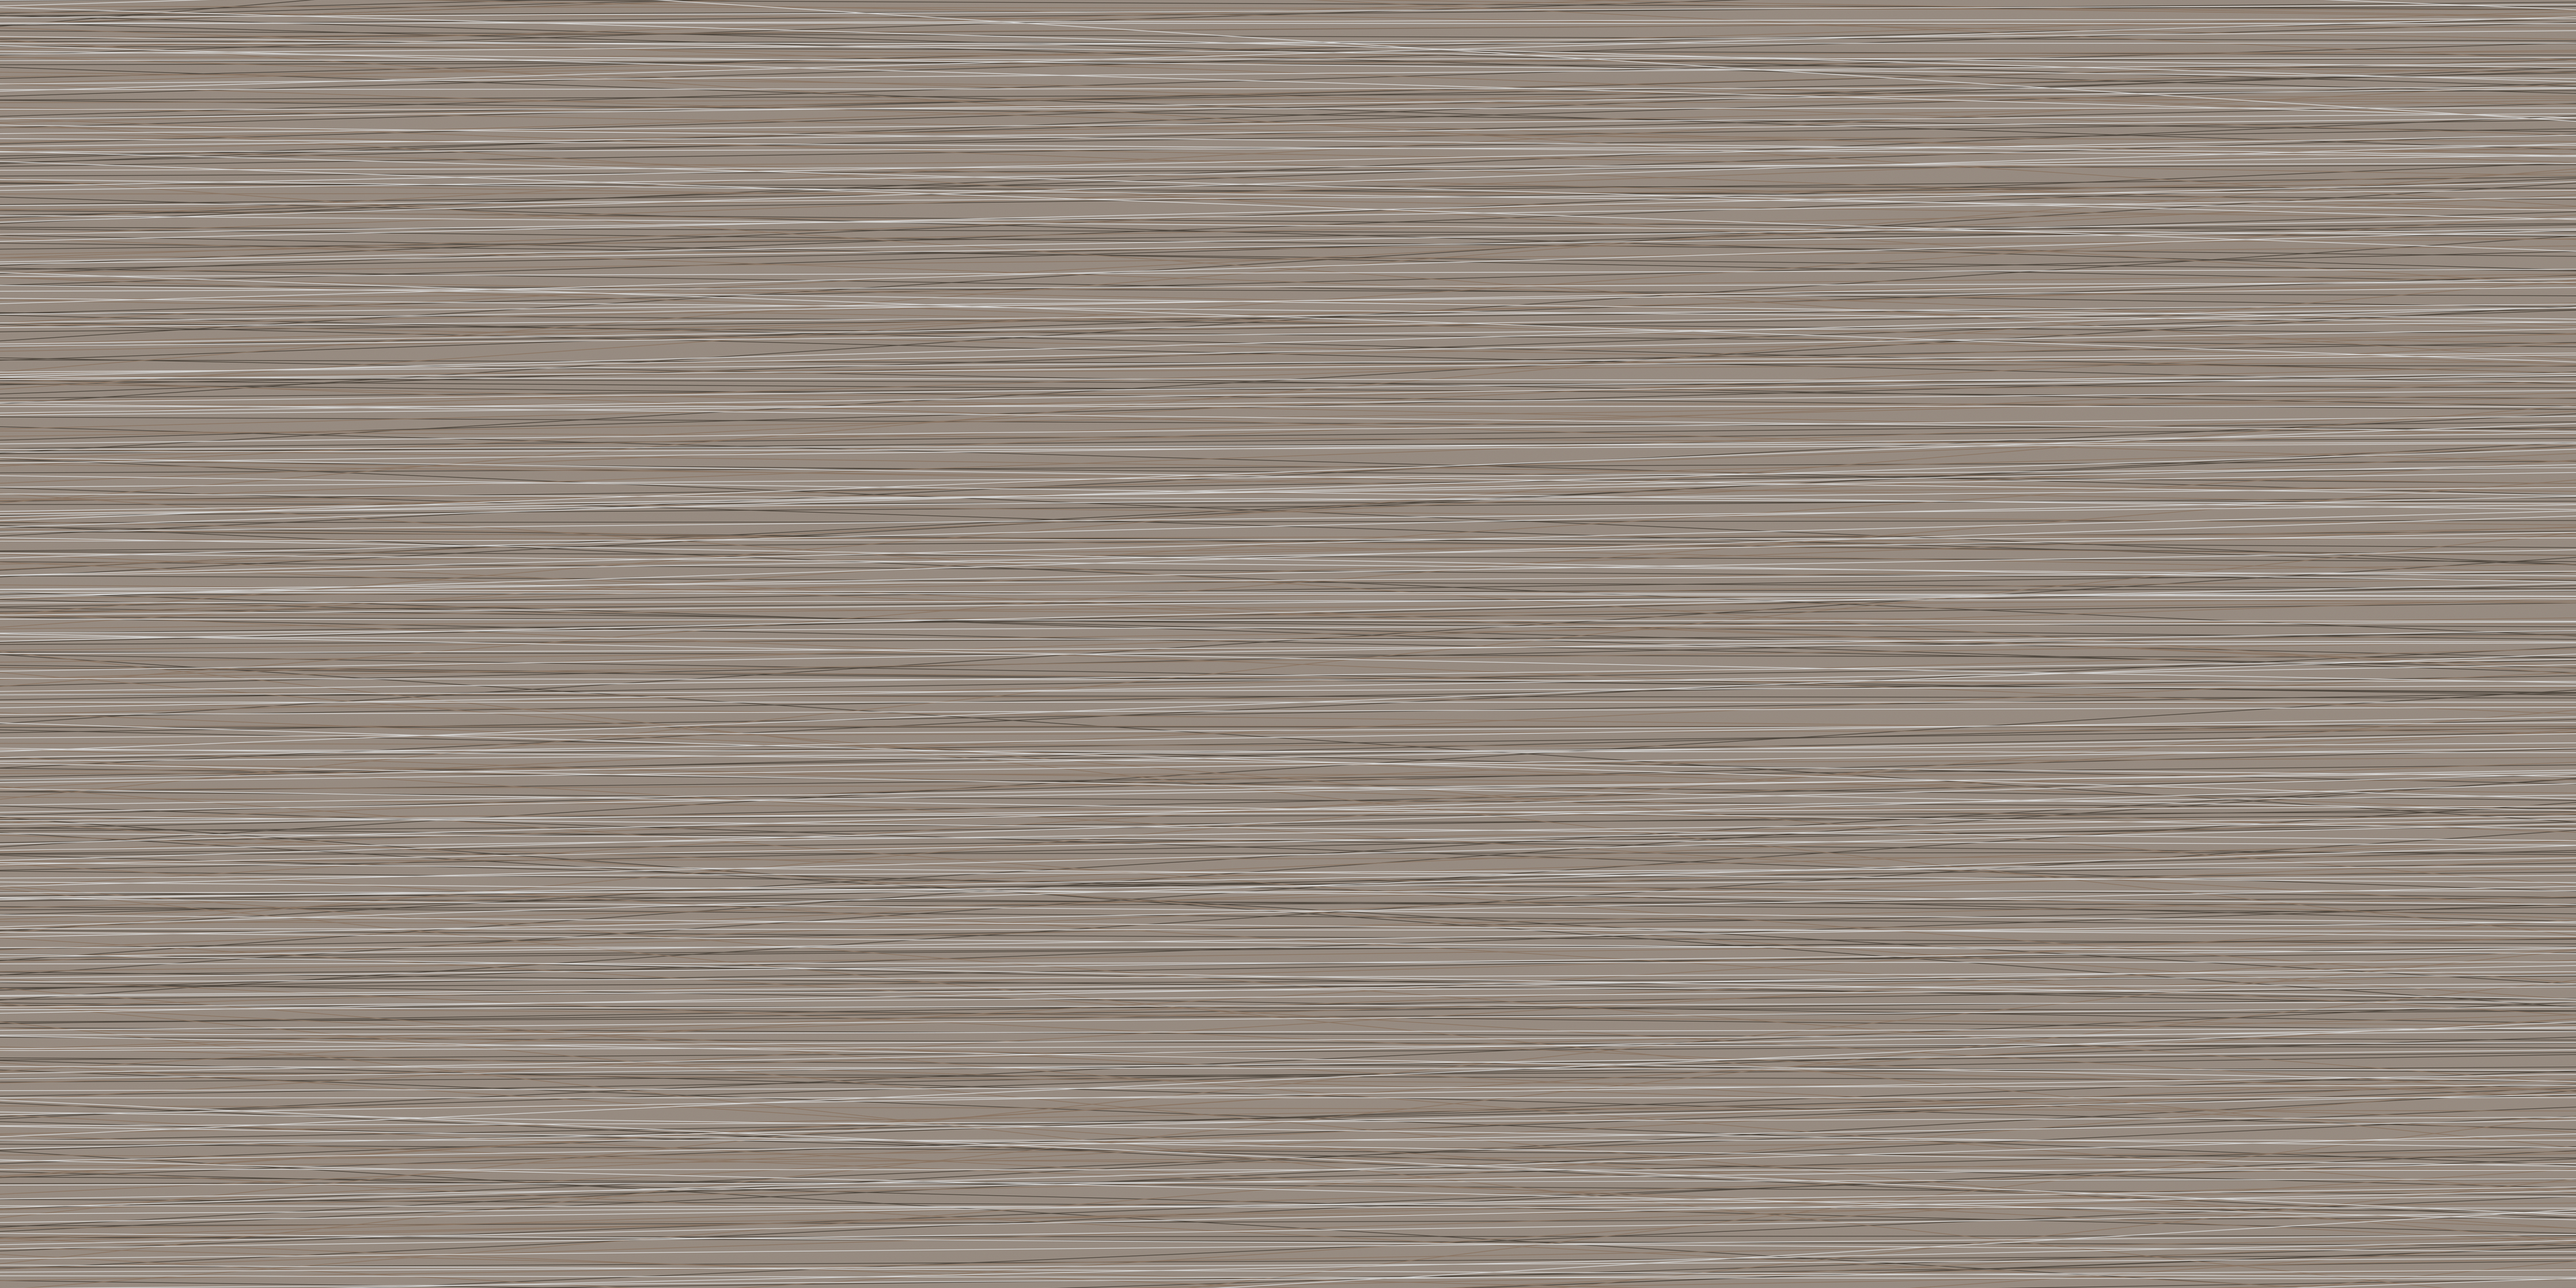 olive pattern color body porcelain field tile from zera annex anatolia collection distributed by surface group international matte finish rectified edge 12x24 rectangle shape